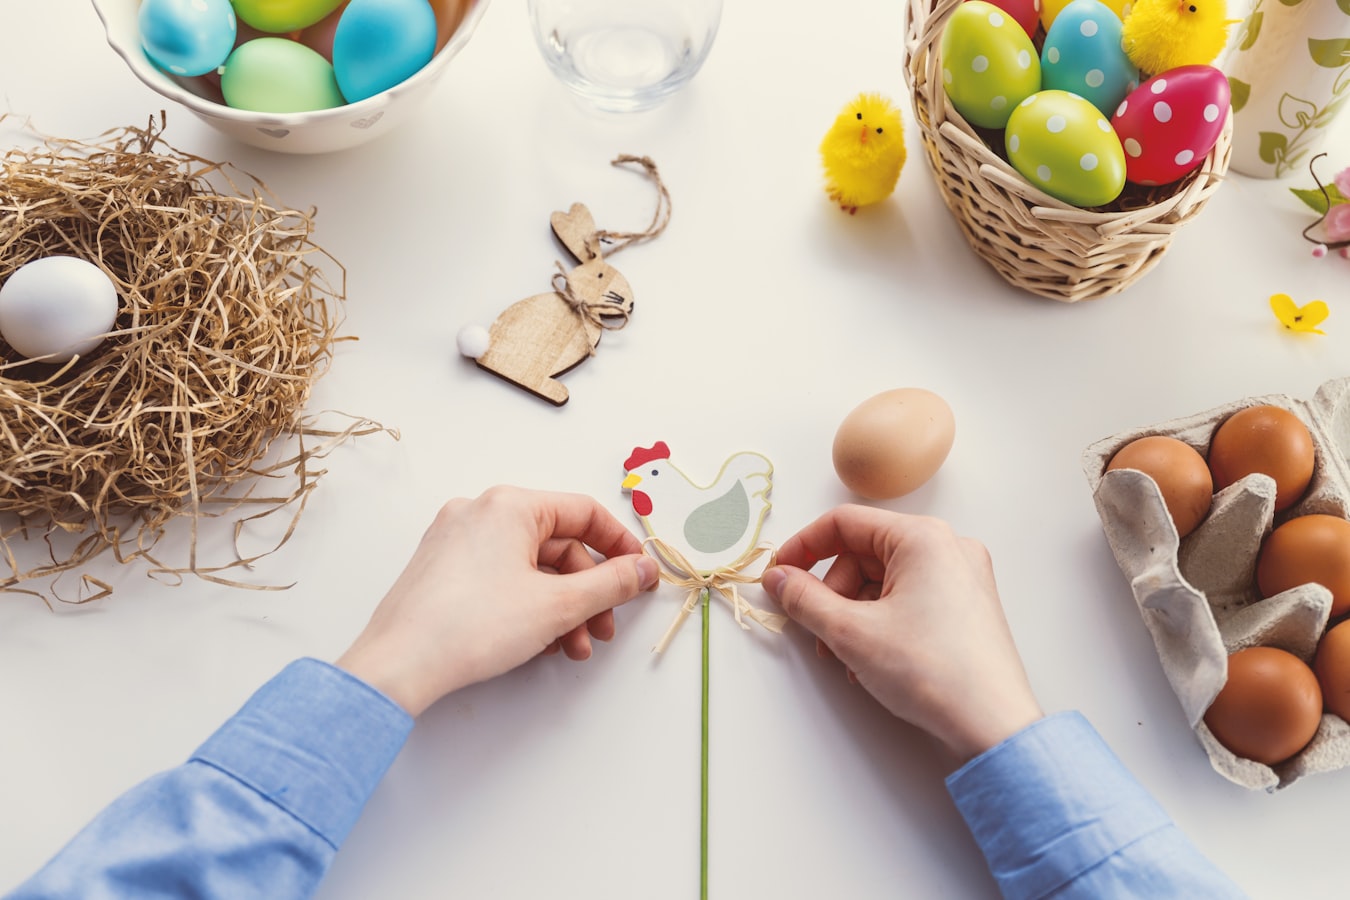 Easter crafting as an easter decoration idea